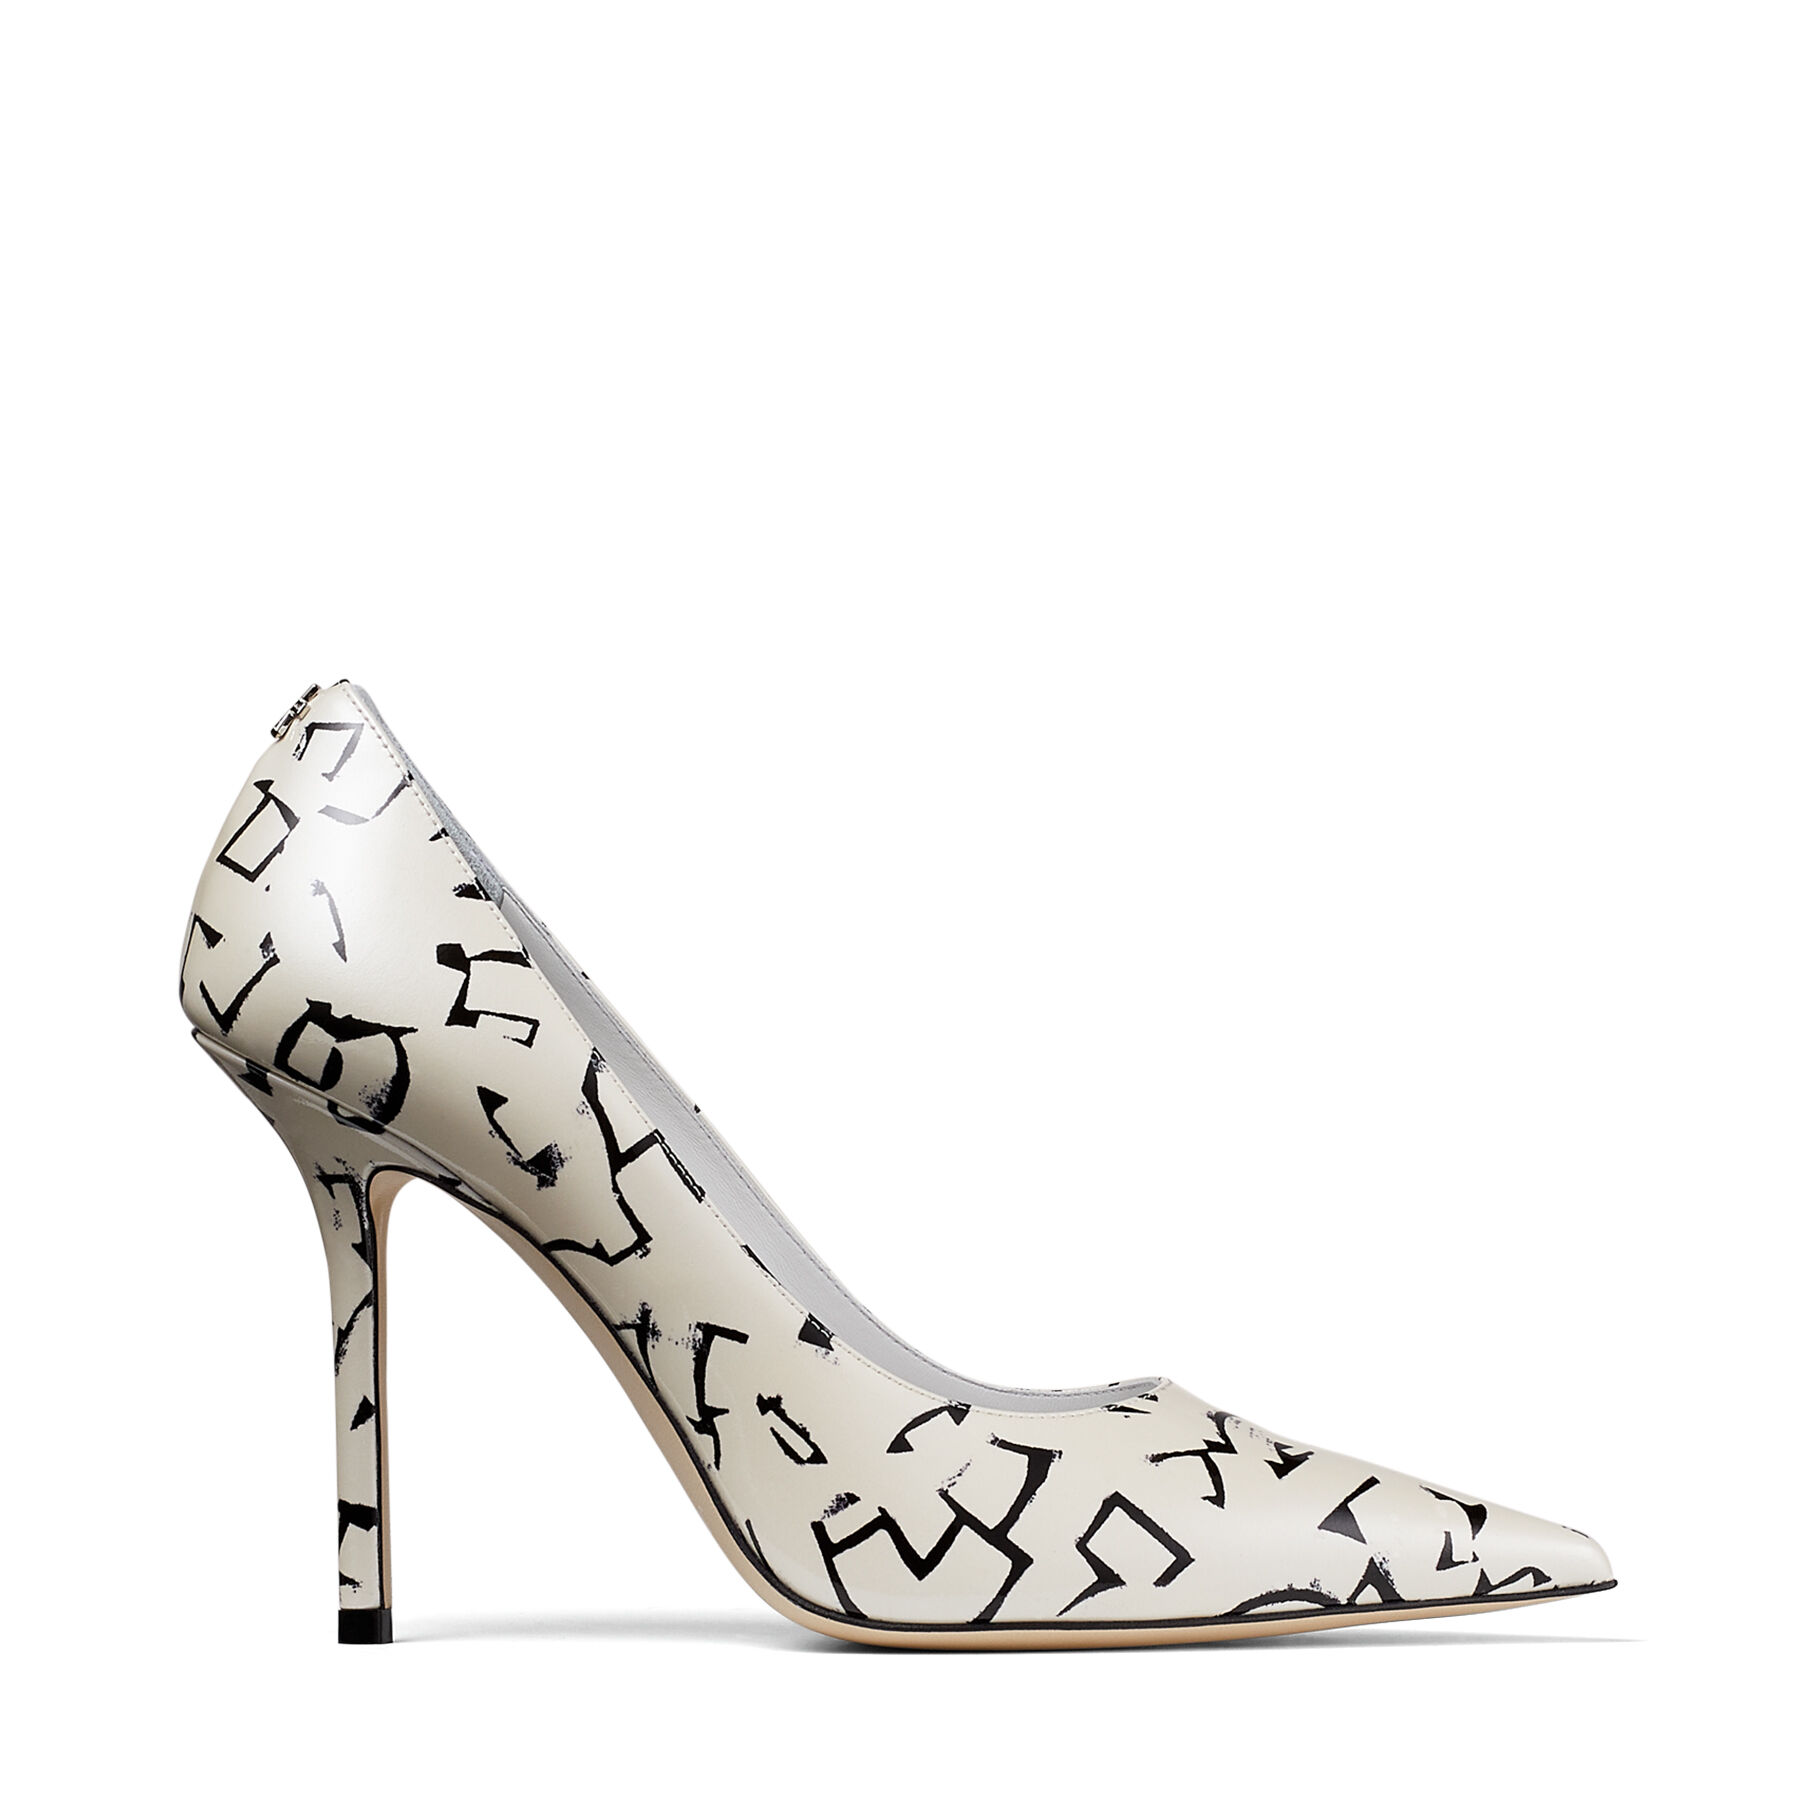 byld Regelmæssighed Dodge White and Black Artwork Printed Patent Leather Pumps | LOVE 100 | JIMMY CHOO  / ERIC HAZE CURATED BY POGGY | JIMMY CHOO